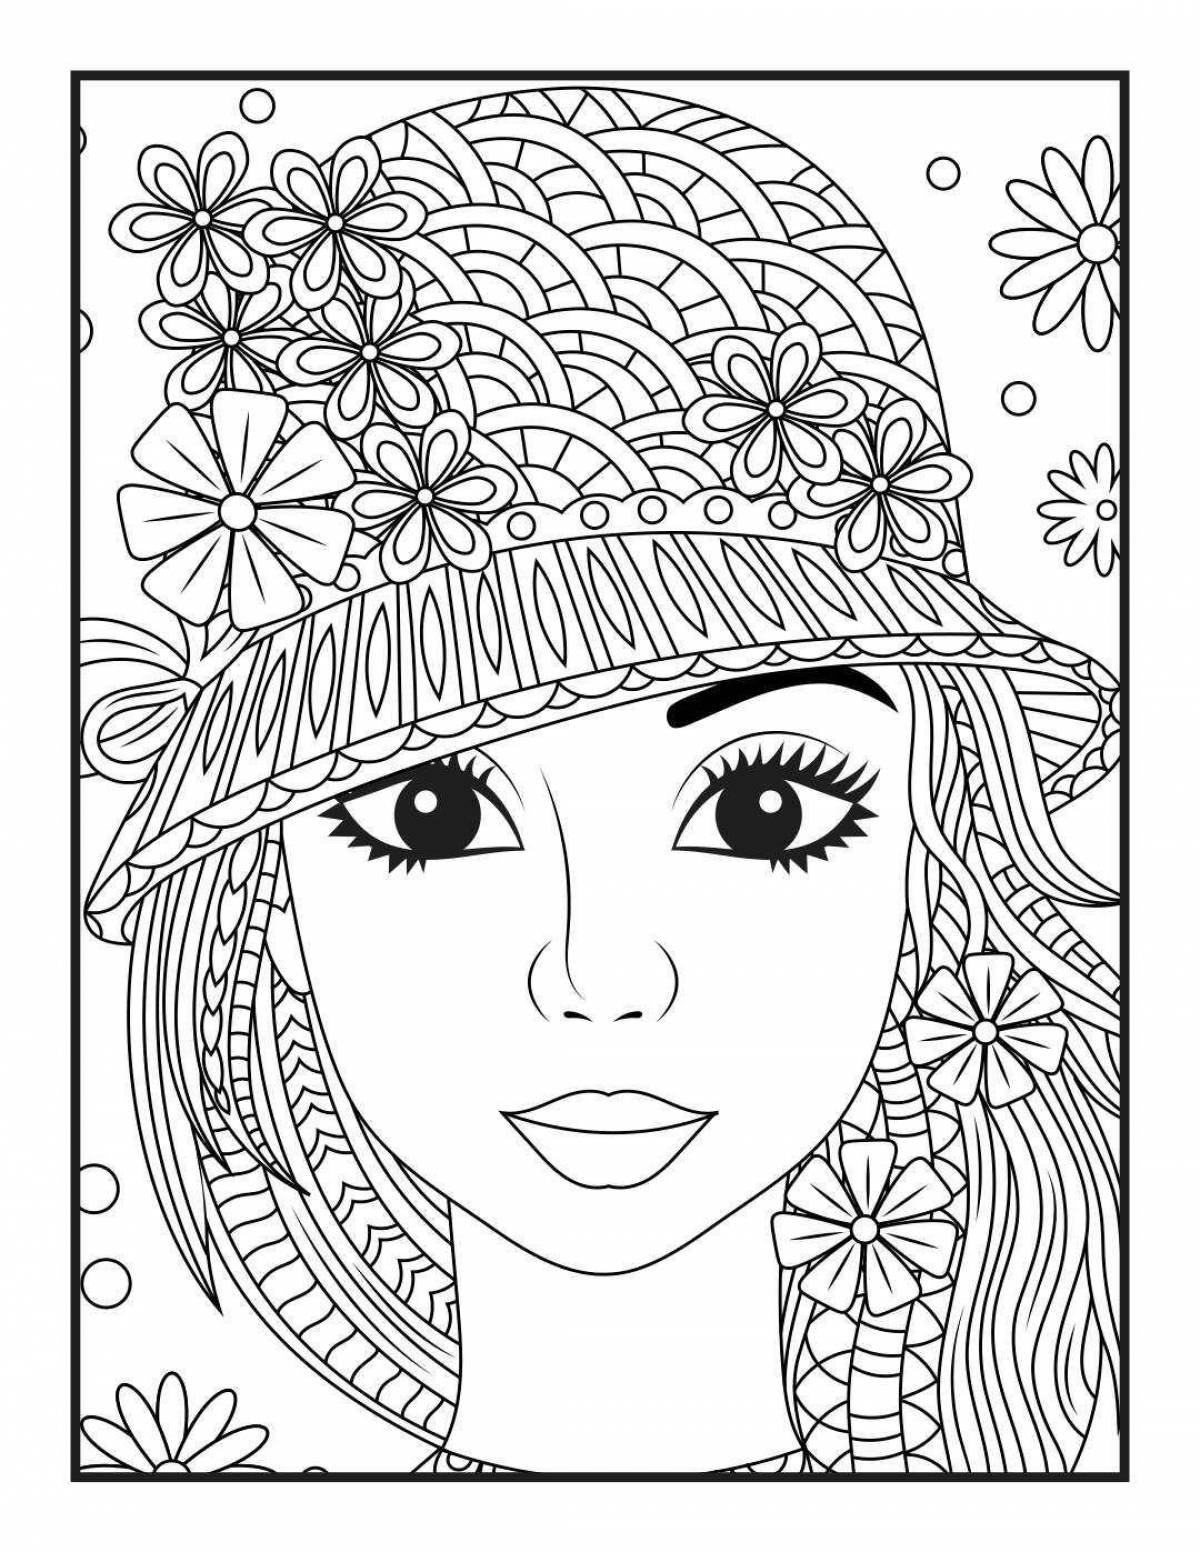 Exciting coloring book for girls 2022